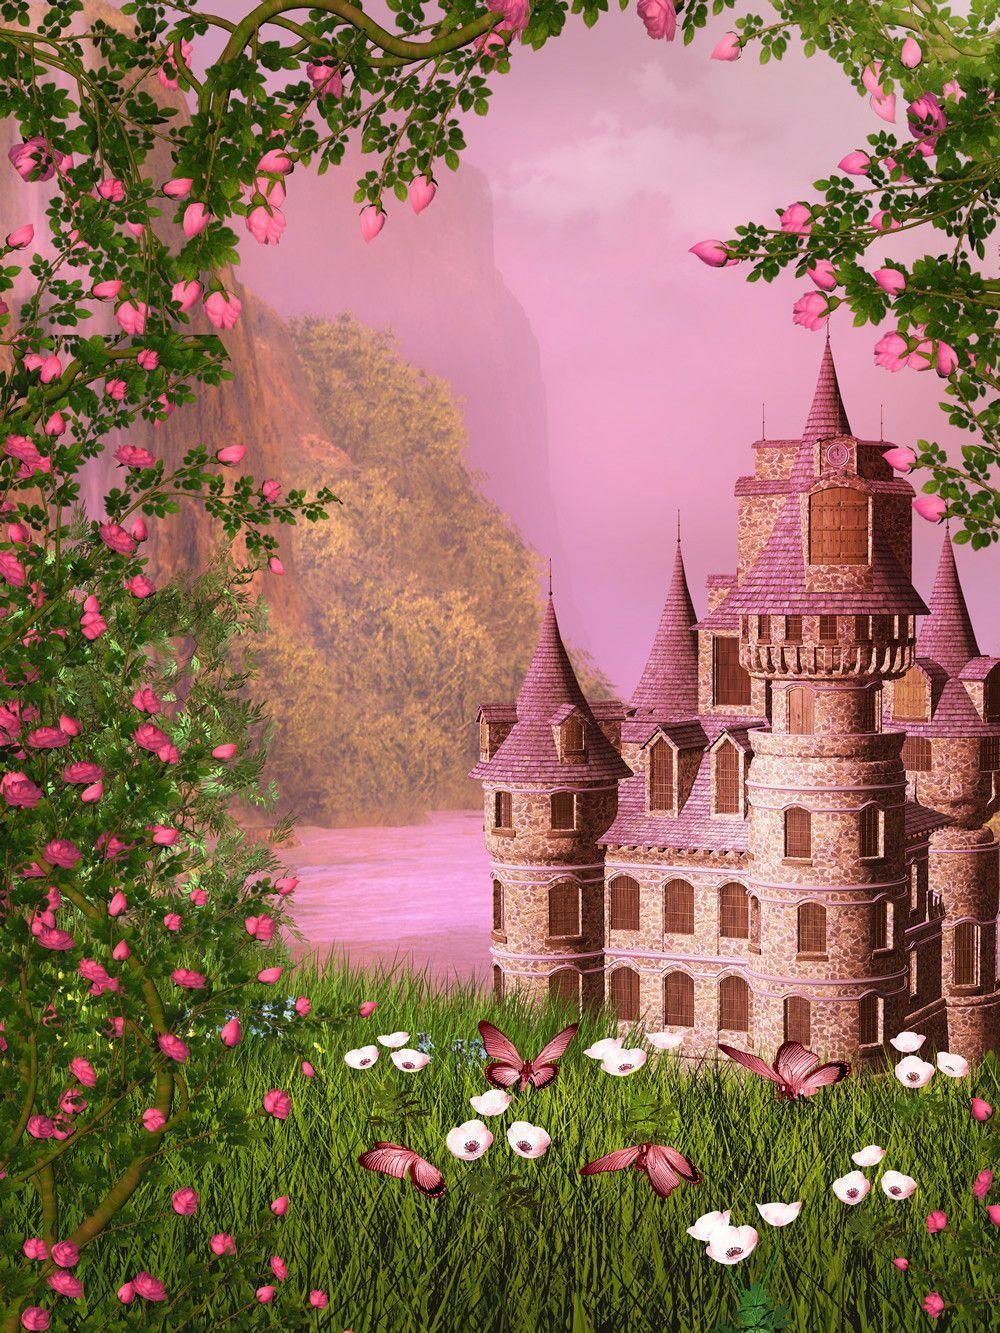 A castle in the middle of some flowers - Castle